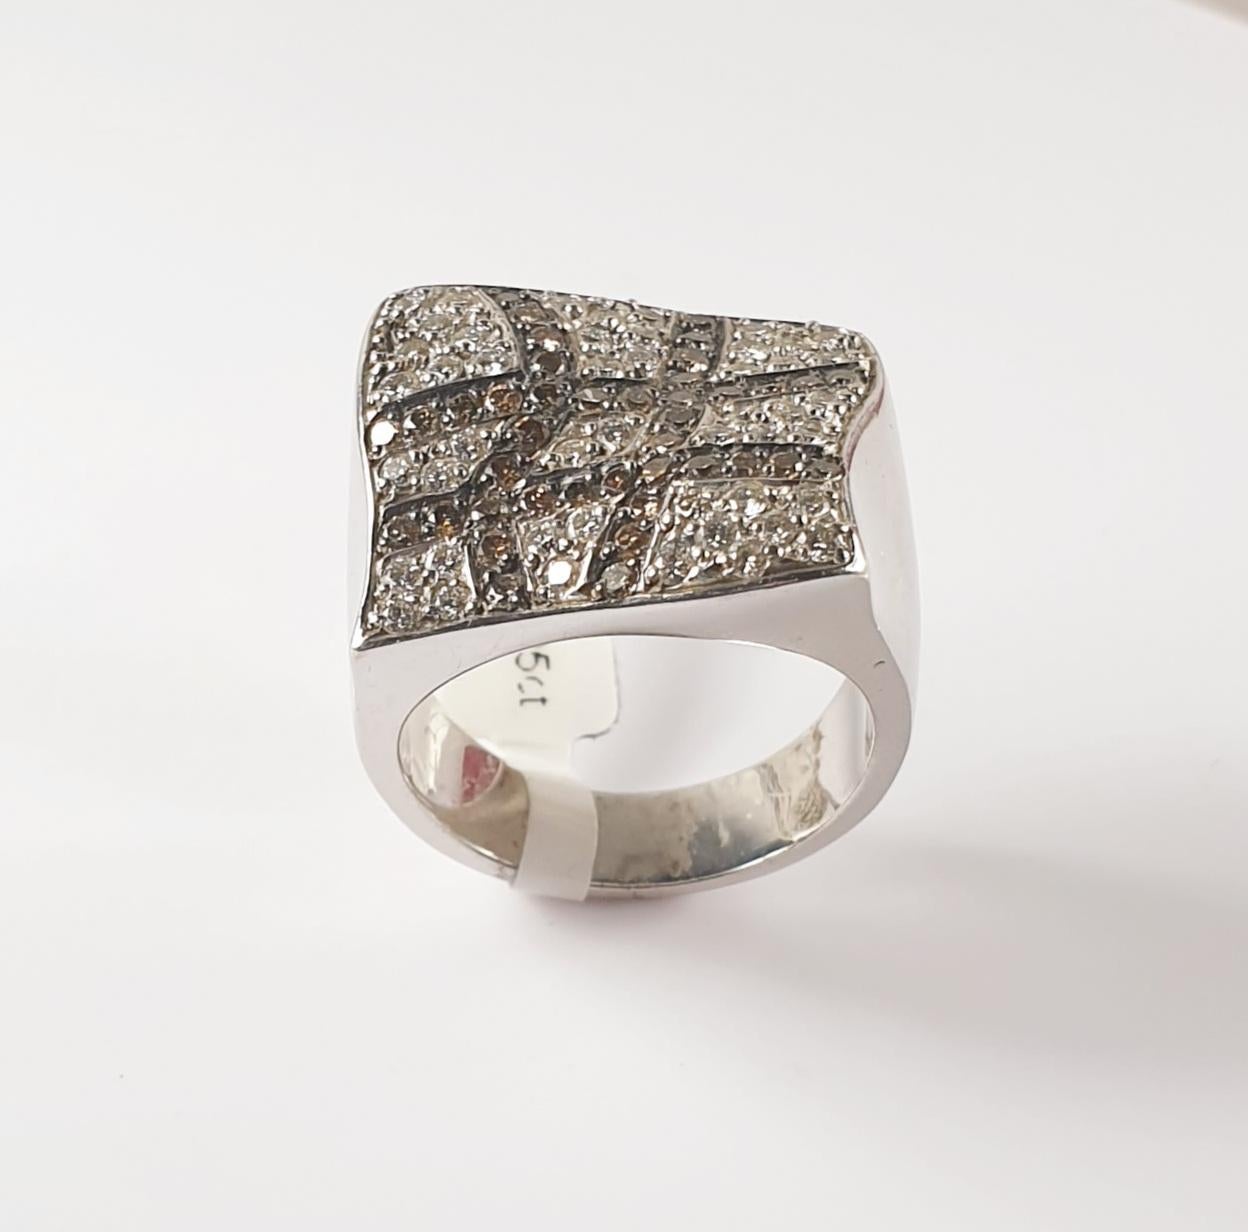 Brown and White Diamonds in Chessboard Design in 18 Karat White Gold Ring
Sleekly crafted in  18K white  gold, the chessboard design in the flag style movement setting and the  high-quality pavé-set diamonds, 
give a chic, high-style sparkler,